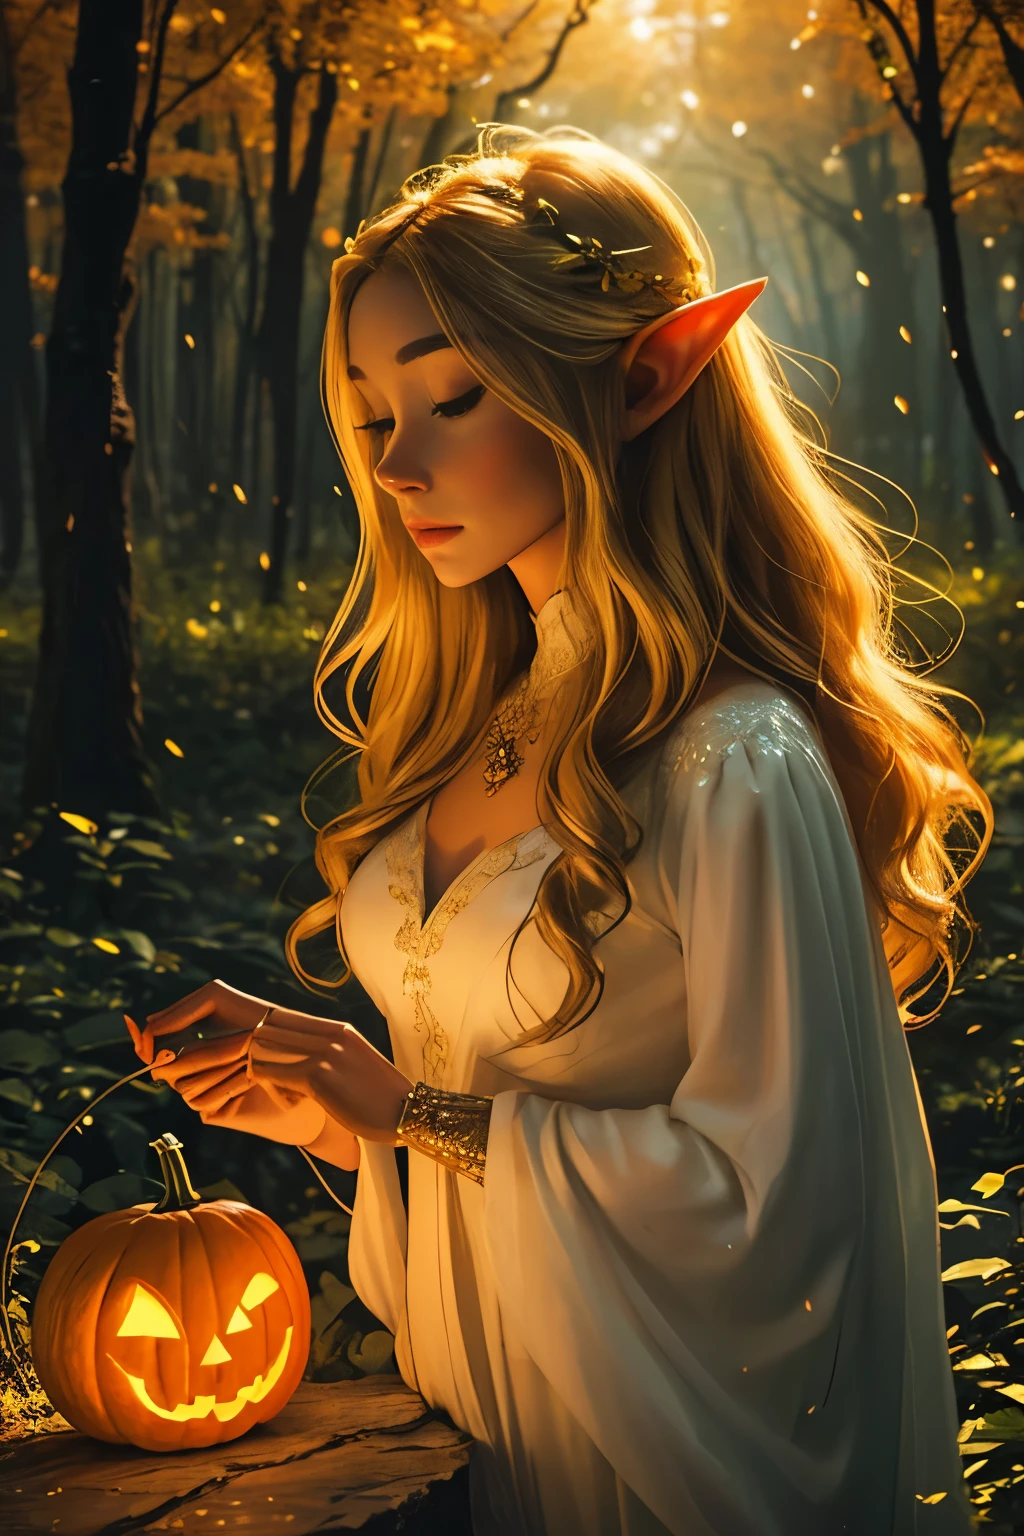 beautiful detailed elf,holding a pumpkin lantern,elegant posture,golden hair flowing in the wind,forest background,magical atmosphere,fairy tale feeling,vibrant colors,soft lighting,enchanted forest,ethereal beauty,portrait,mythical creature,magic,autumn theme,whimsical,glowing eyes,fantasy art,impressive details,mystical,sparkling,delicate features,luminous pumpkin,dreamlike,pure and graceful,enchanted garden,feminine power,mesmerizing,airy and light,imagination and wonder,serene expression,enchanting,ethereal glow